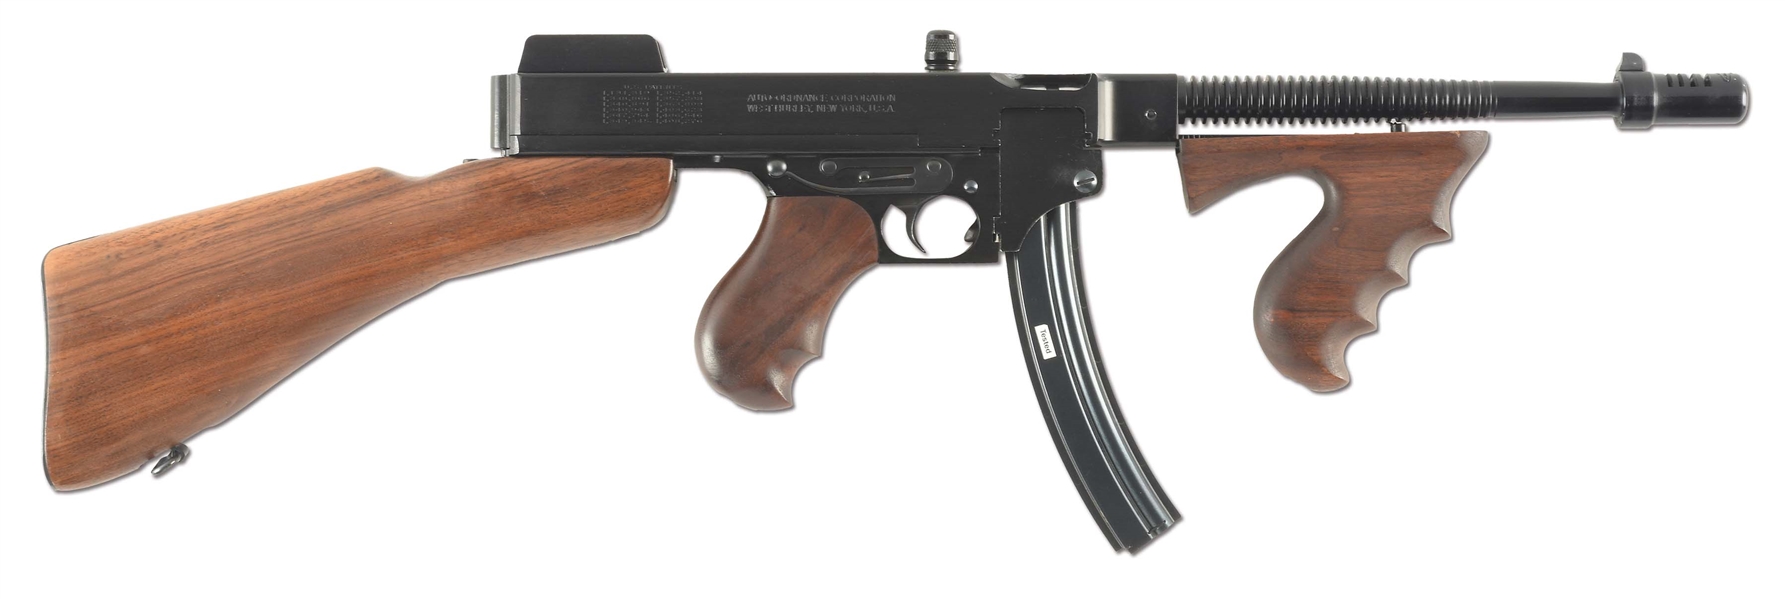 (N) VERY SCARCE AND POPULAR AUTO ORDNANCE MODEL 1928 A22 THOMPSON MACHINE GUN IN .22 LR (CURIO AND RELIC).